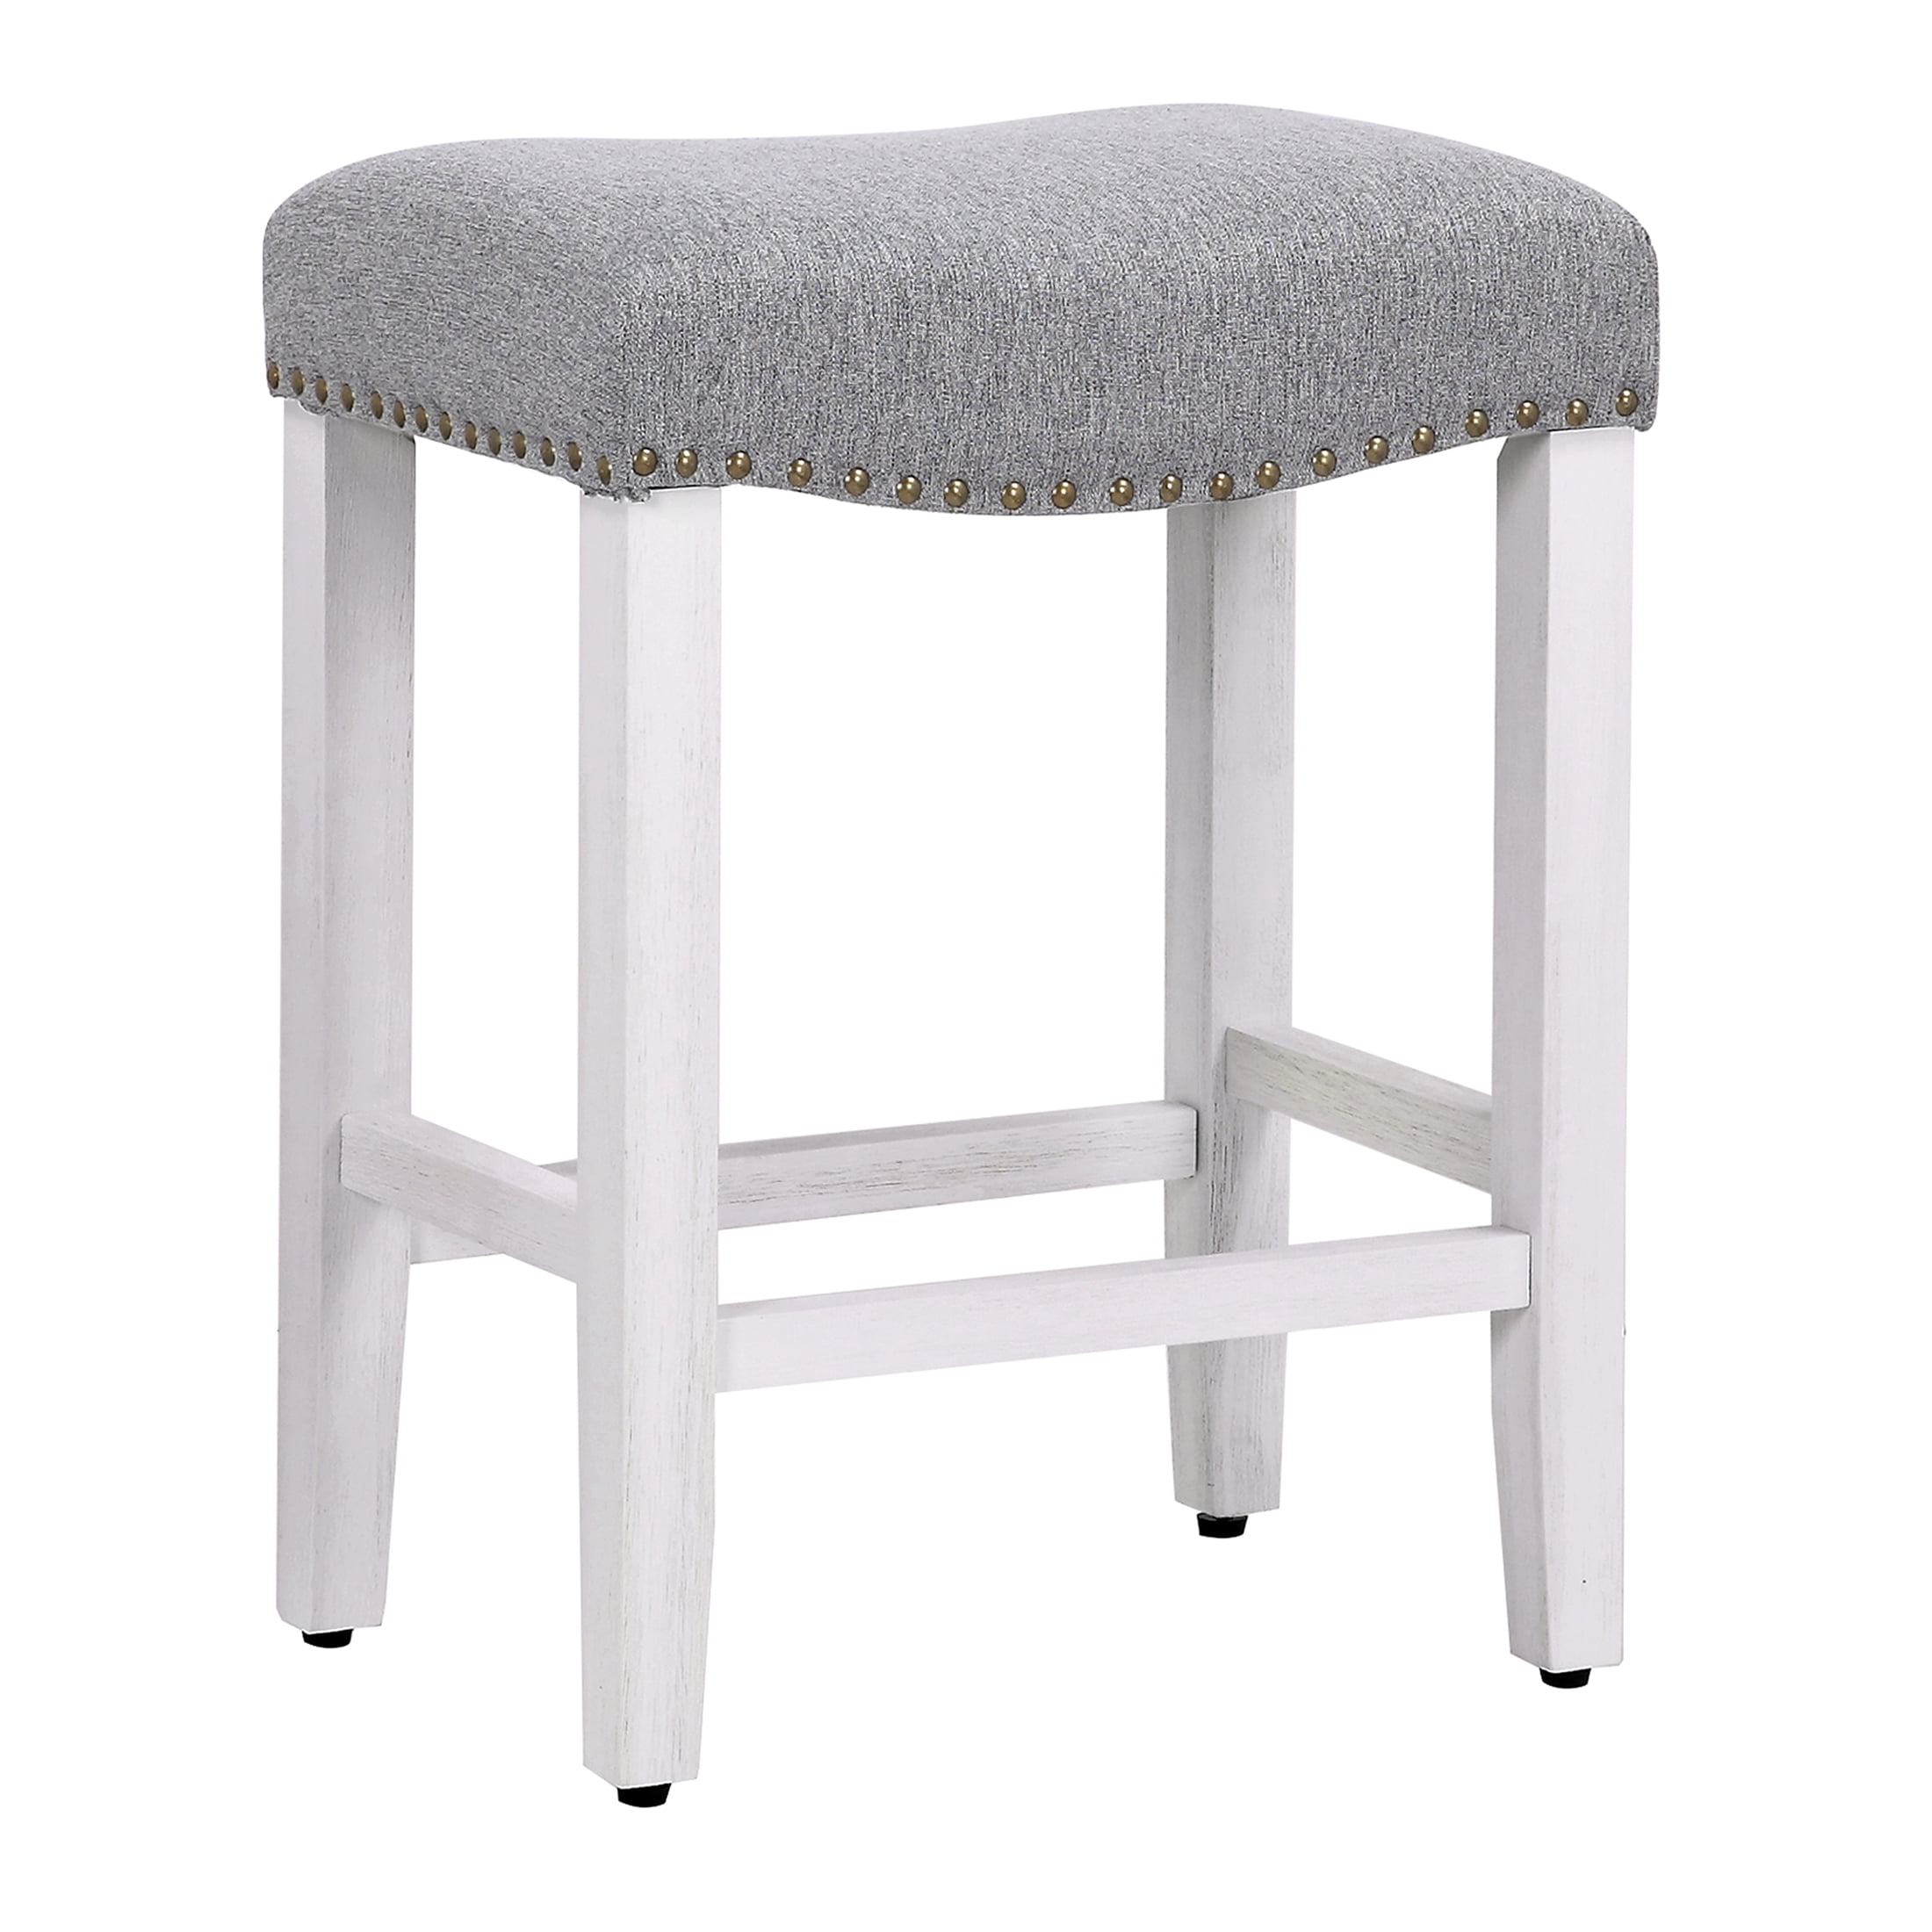 WestinTrends 24 Inch Counter Height Bar Stool, Modern Farmhouse Saddle  Stool Chair, Linen Upholstered Cushion with Solid Wood Leg for Kitchen  Counter